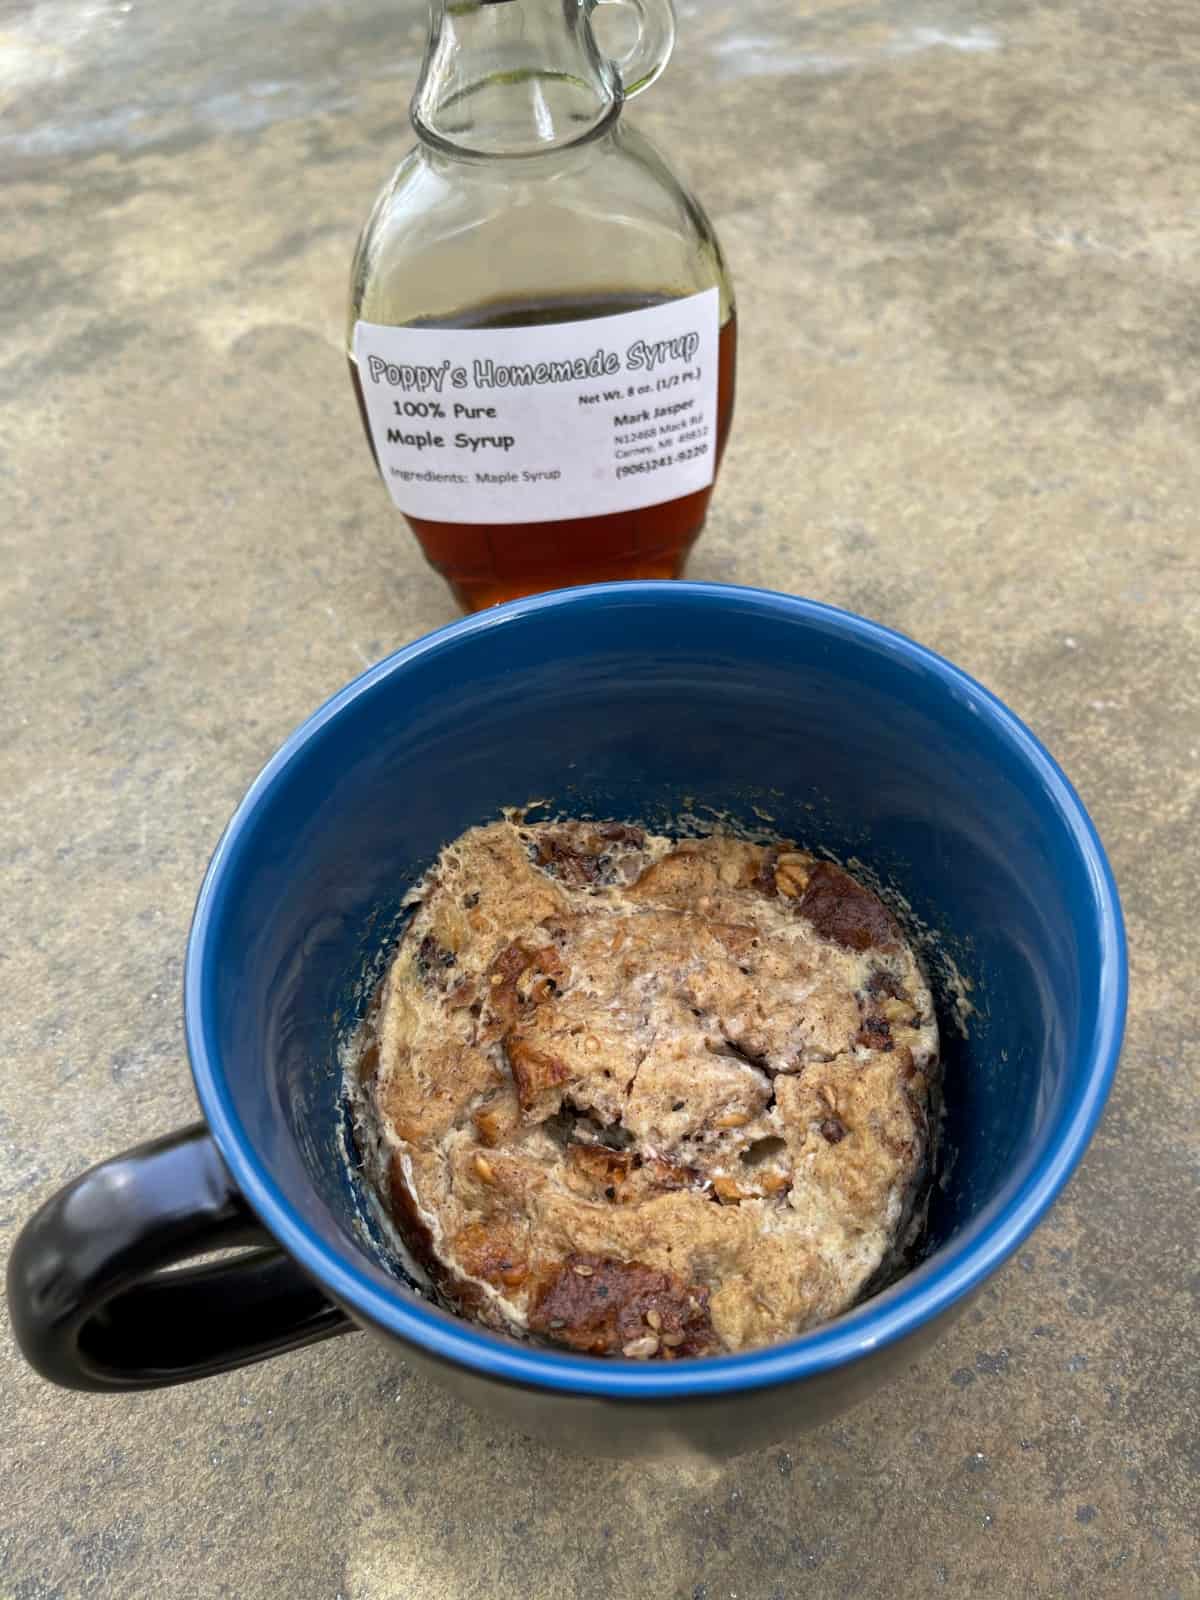 Microwave French toast in blue mug with bottle of maple syrup.